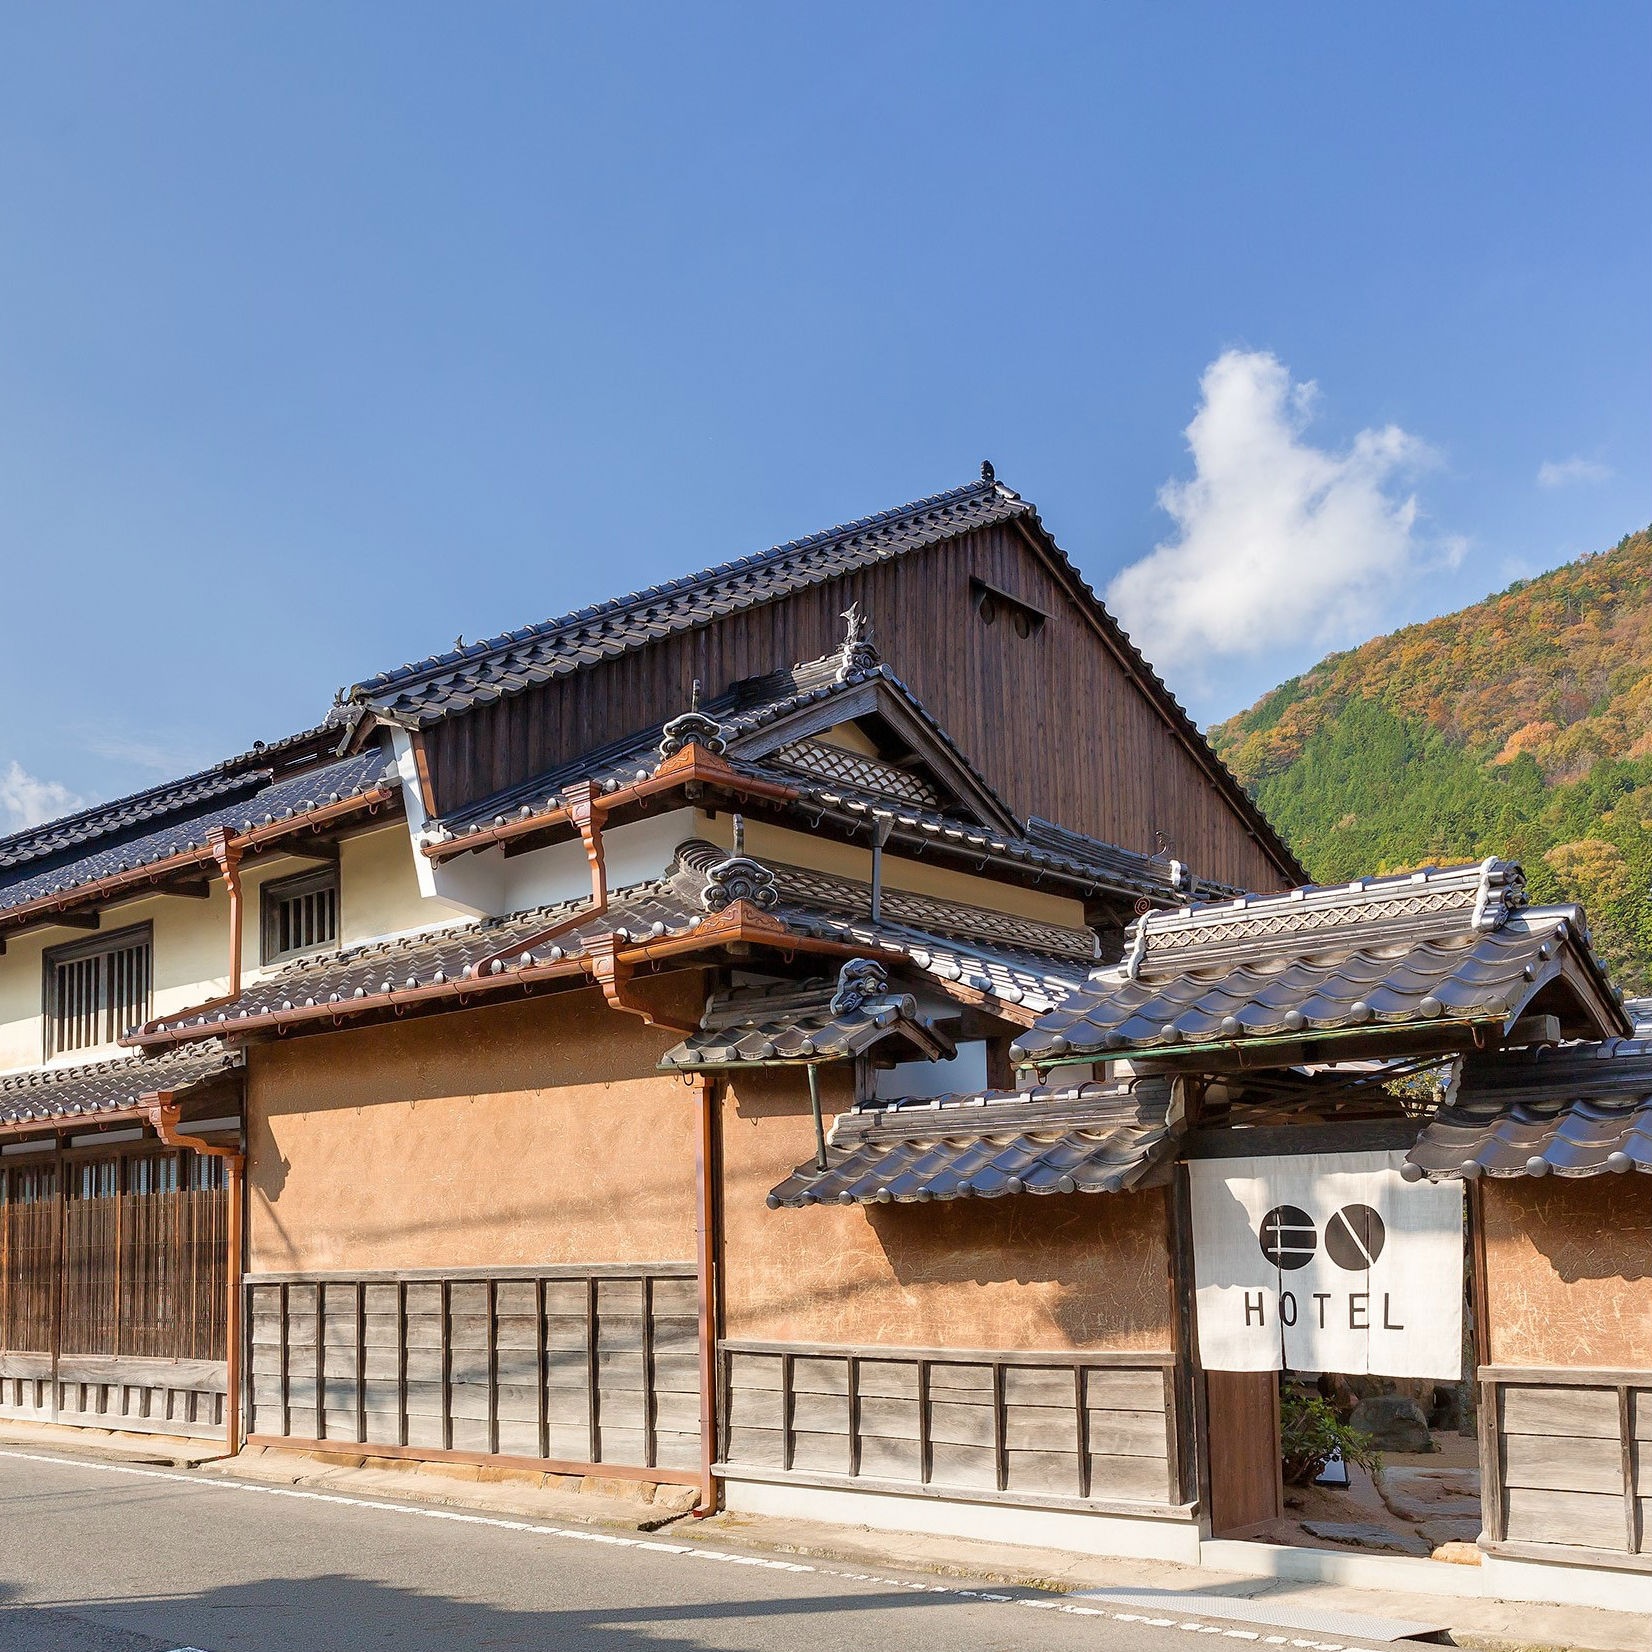 Enjoy a leisurely stay in the castle town at this hotel with good access to Takeda Castle.